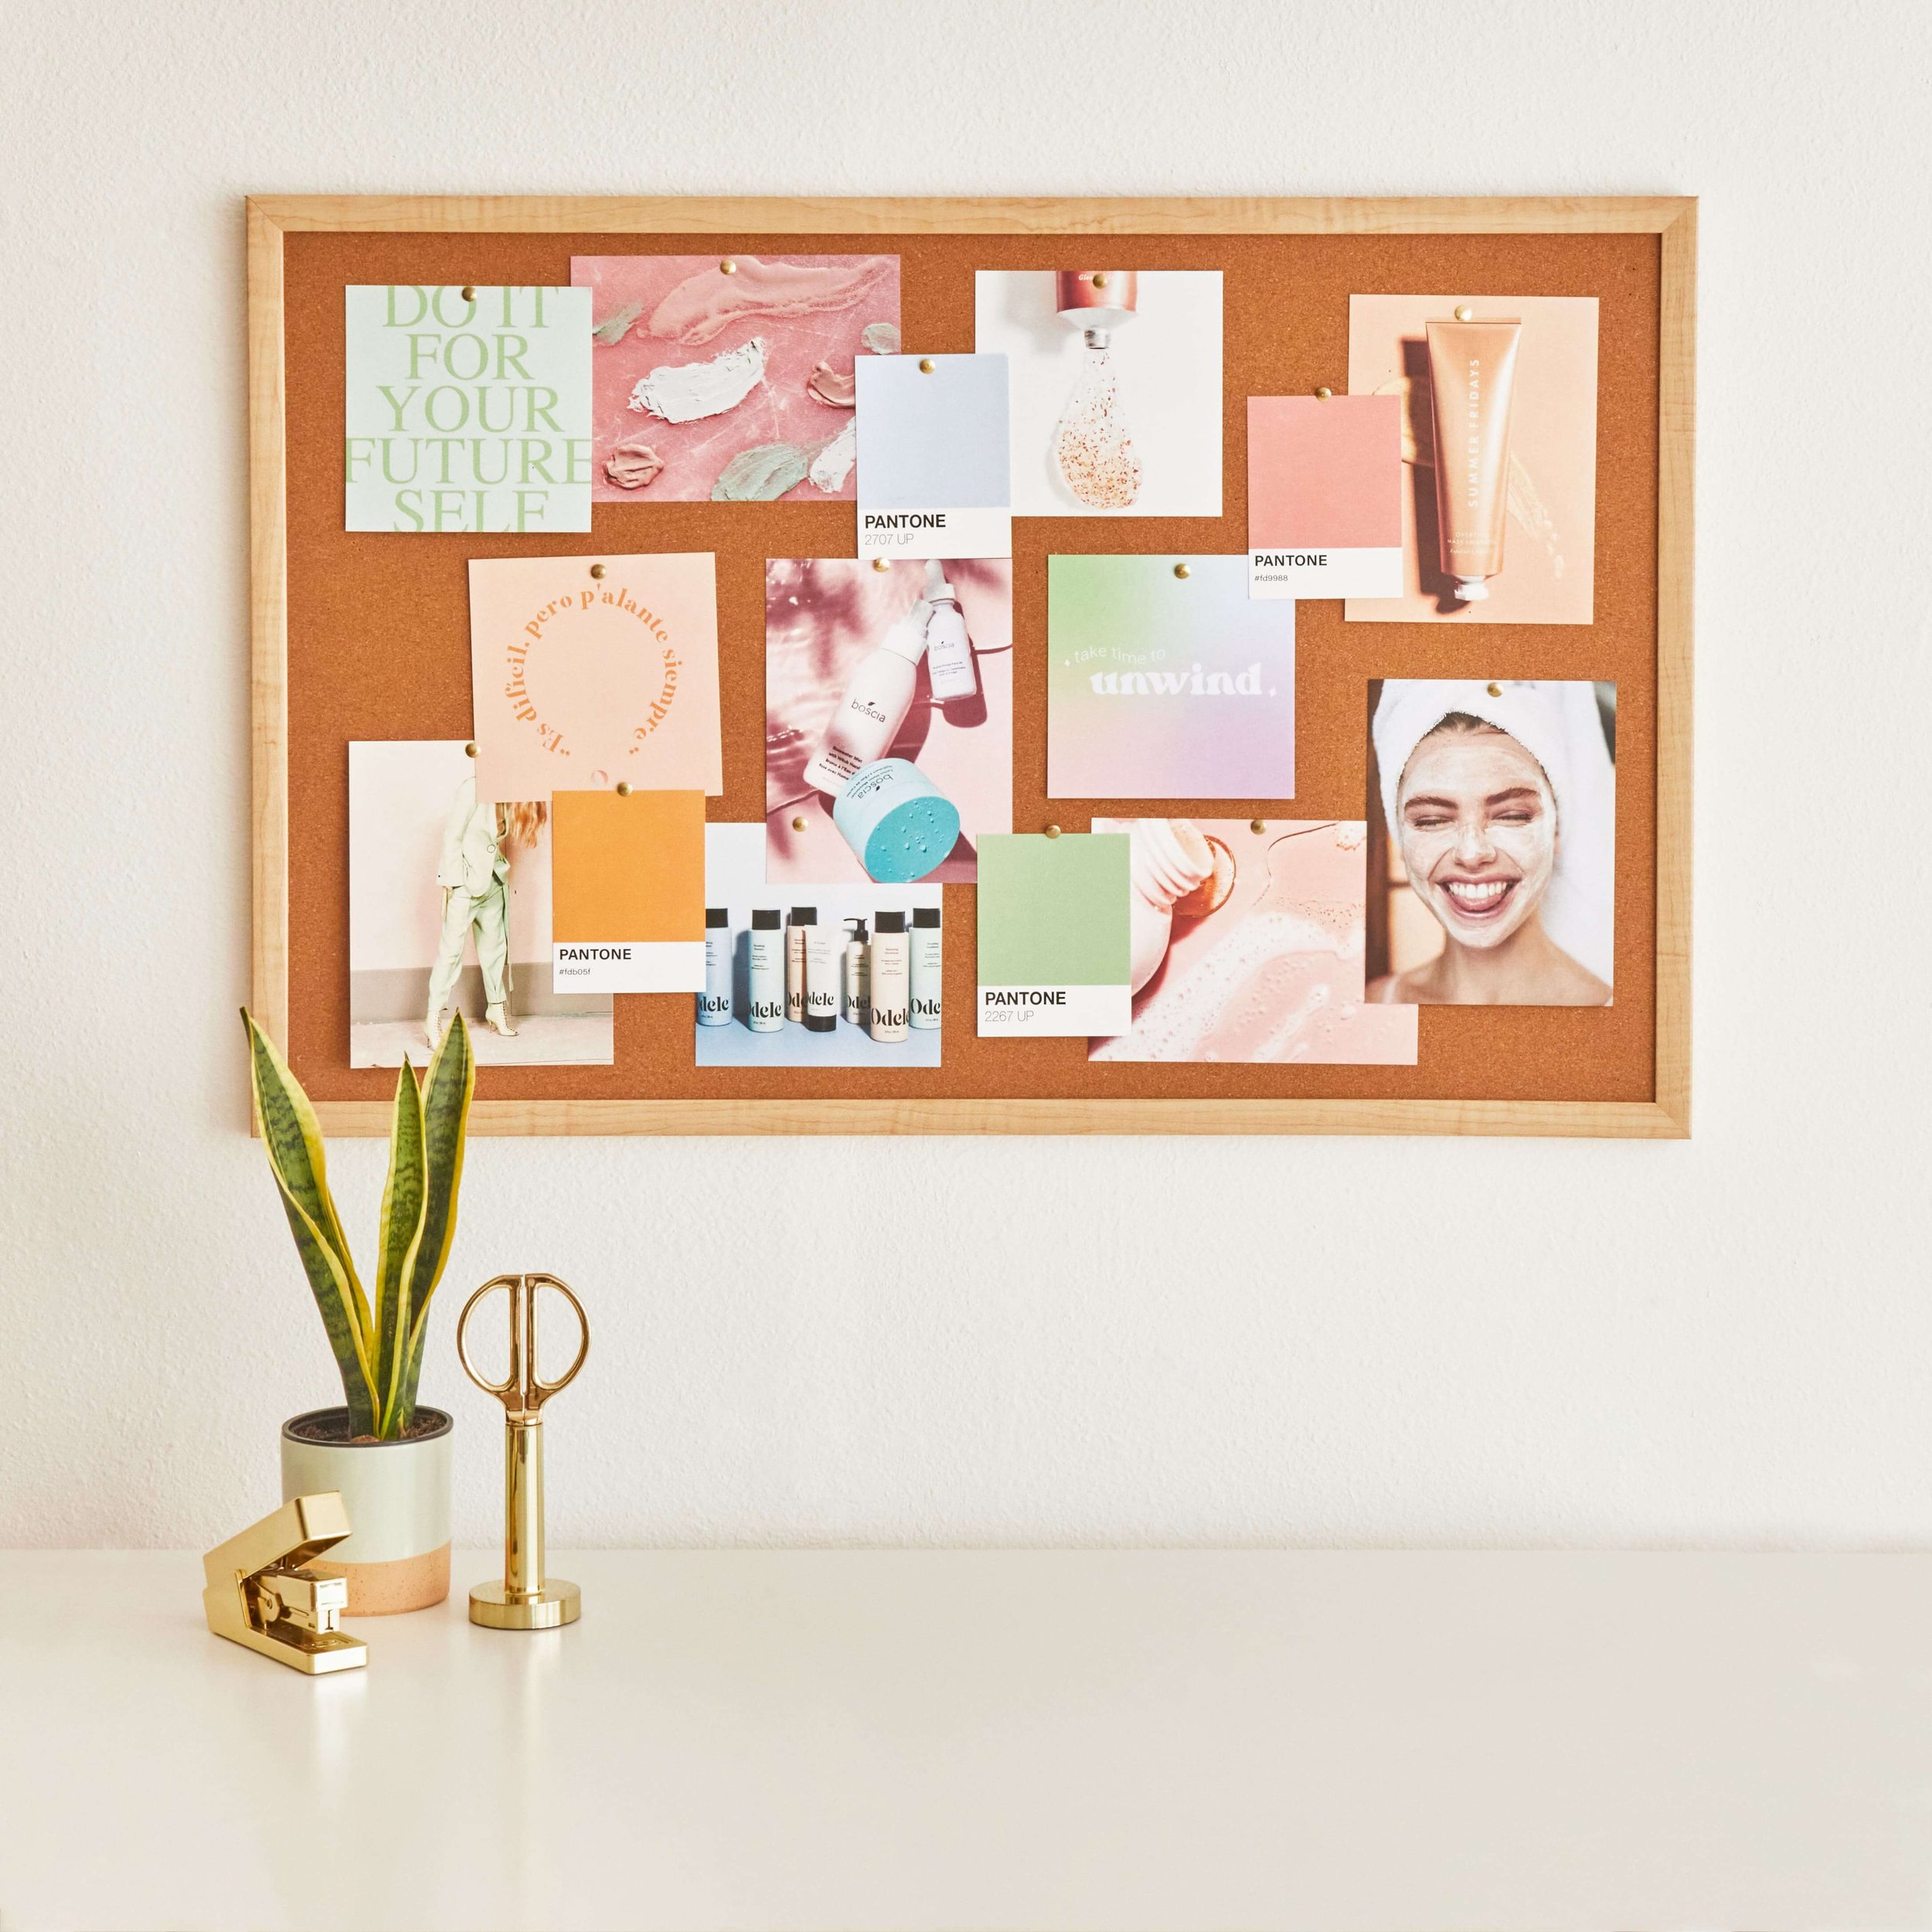 Spring Cleaning Tips to Breathe Life into Your Workspace: A corkboard with various bright images hangs on a white wall.